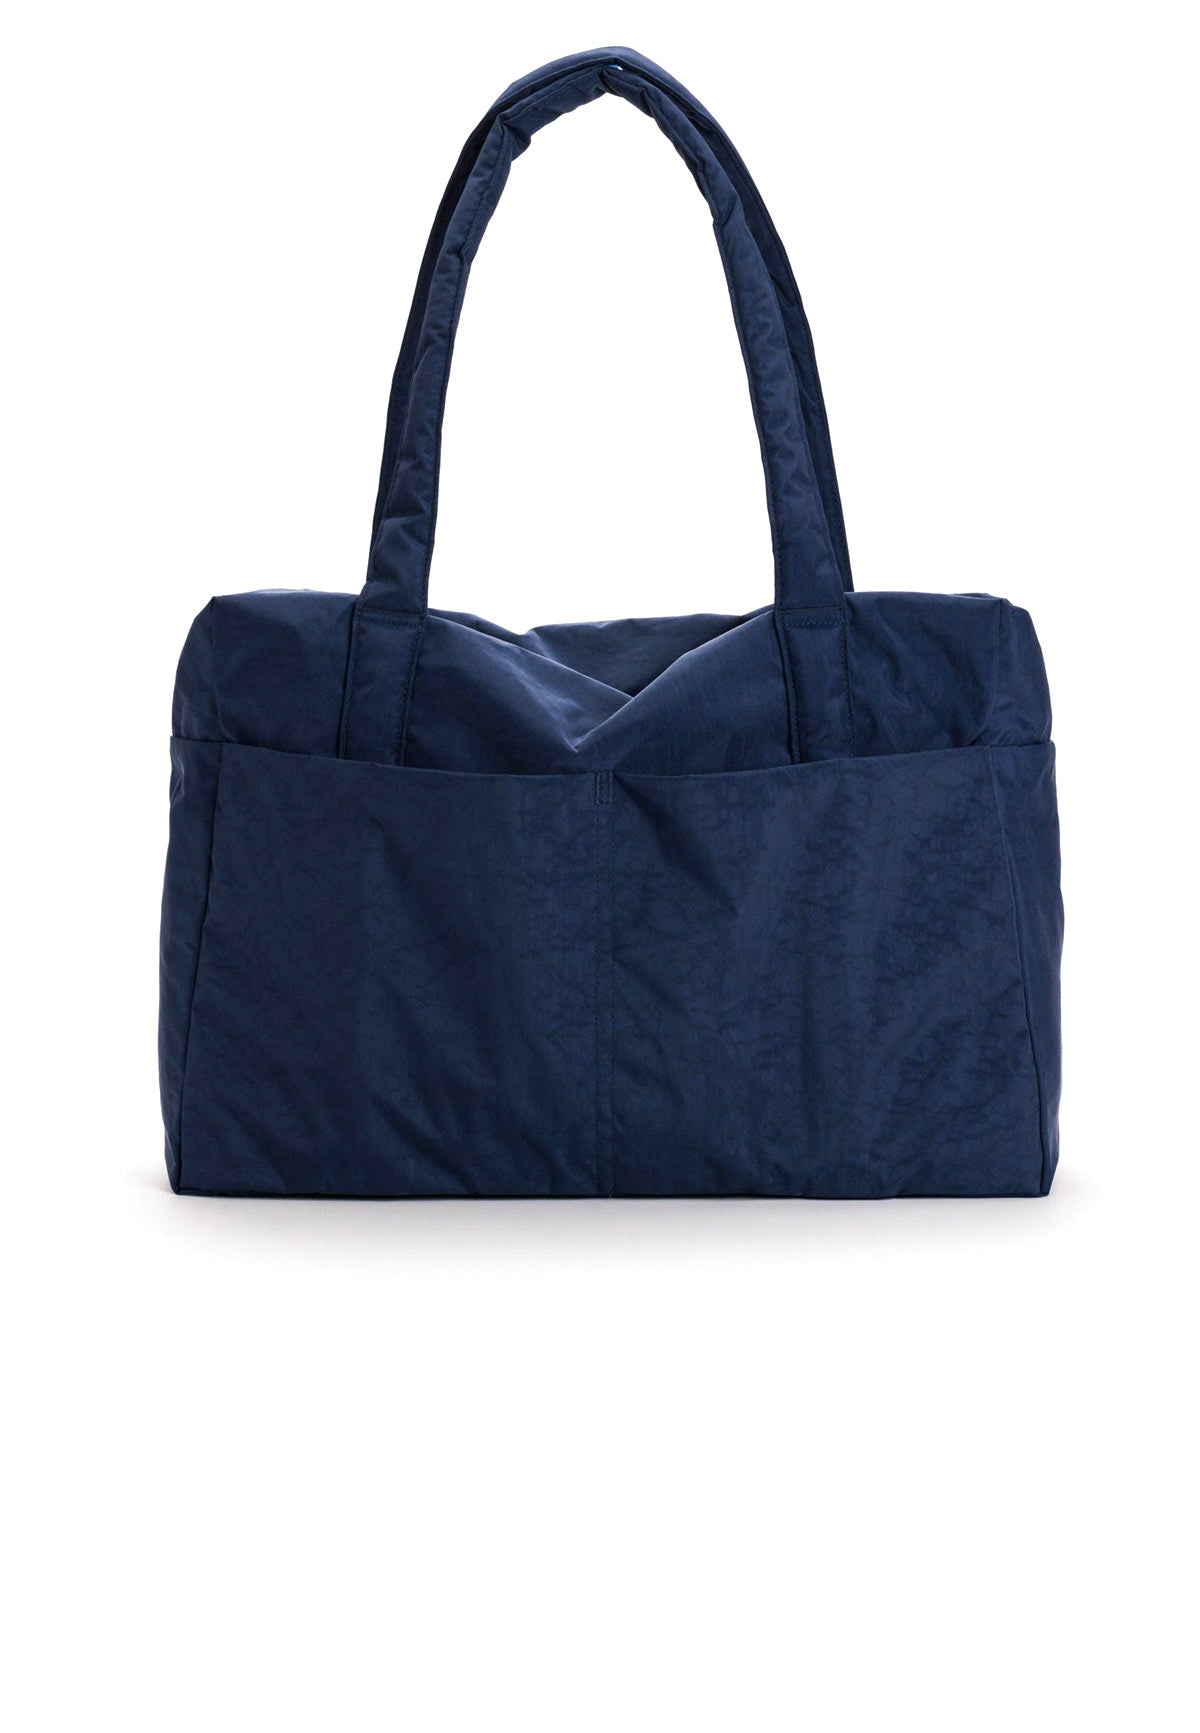 CLOUD CARRY ON NAVY